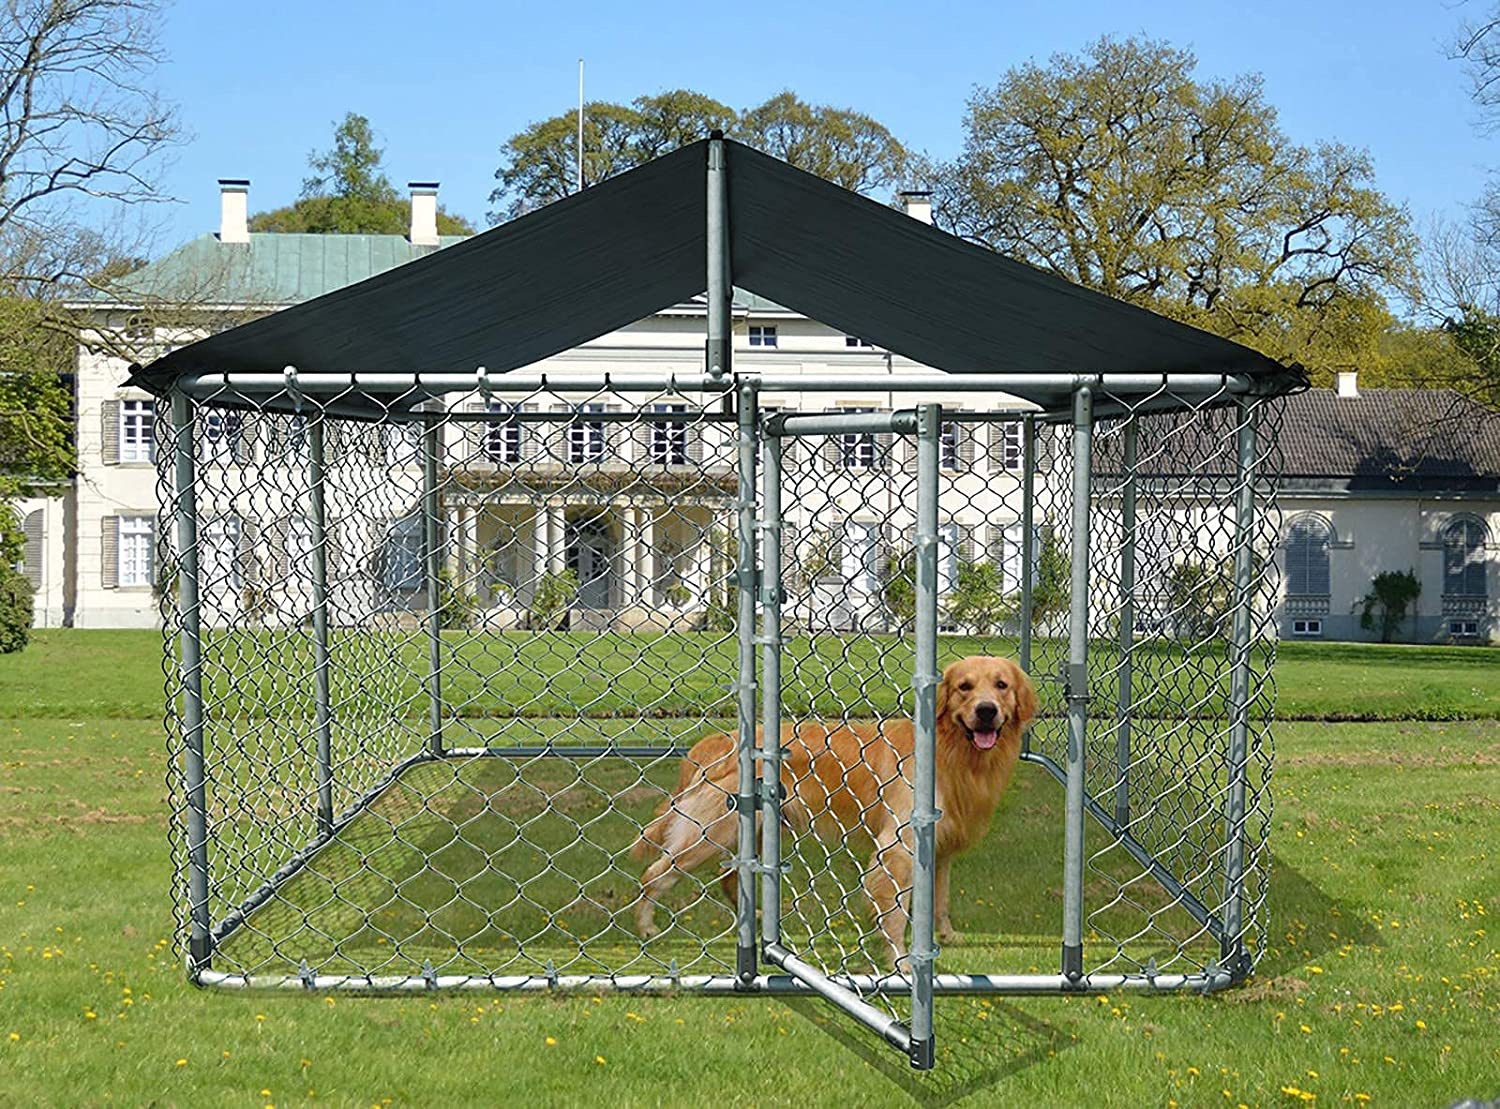 AKANORS Outdoor Chain Link Dog Kennel with Weatherproof Cover - Large Heavy Duty Pet House Run Exercise Playpen for Training - Chicken Coop Hen Cage Durable Galvanized Steel Frame